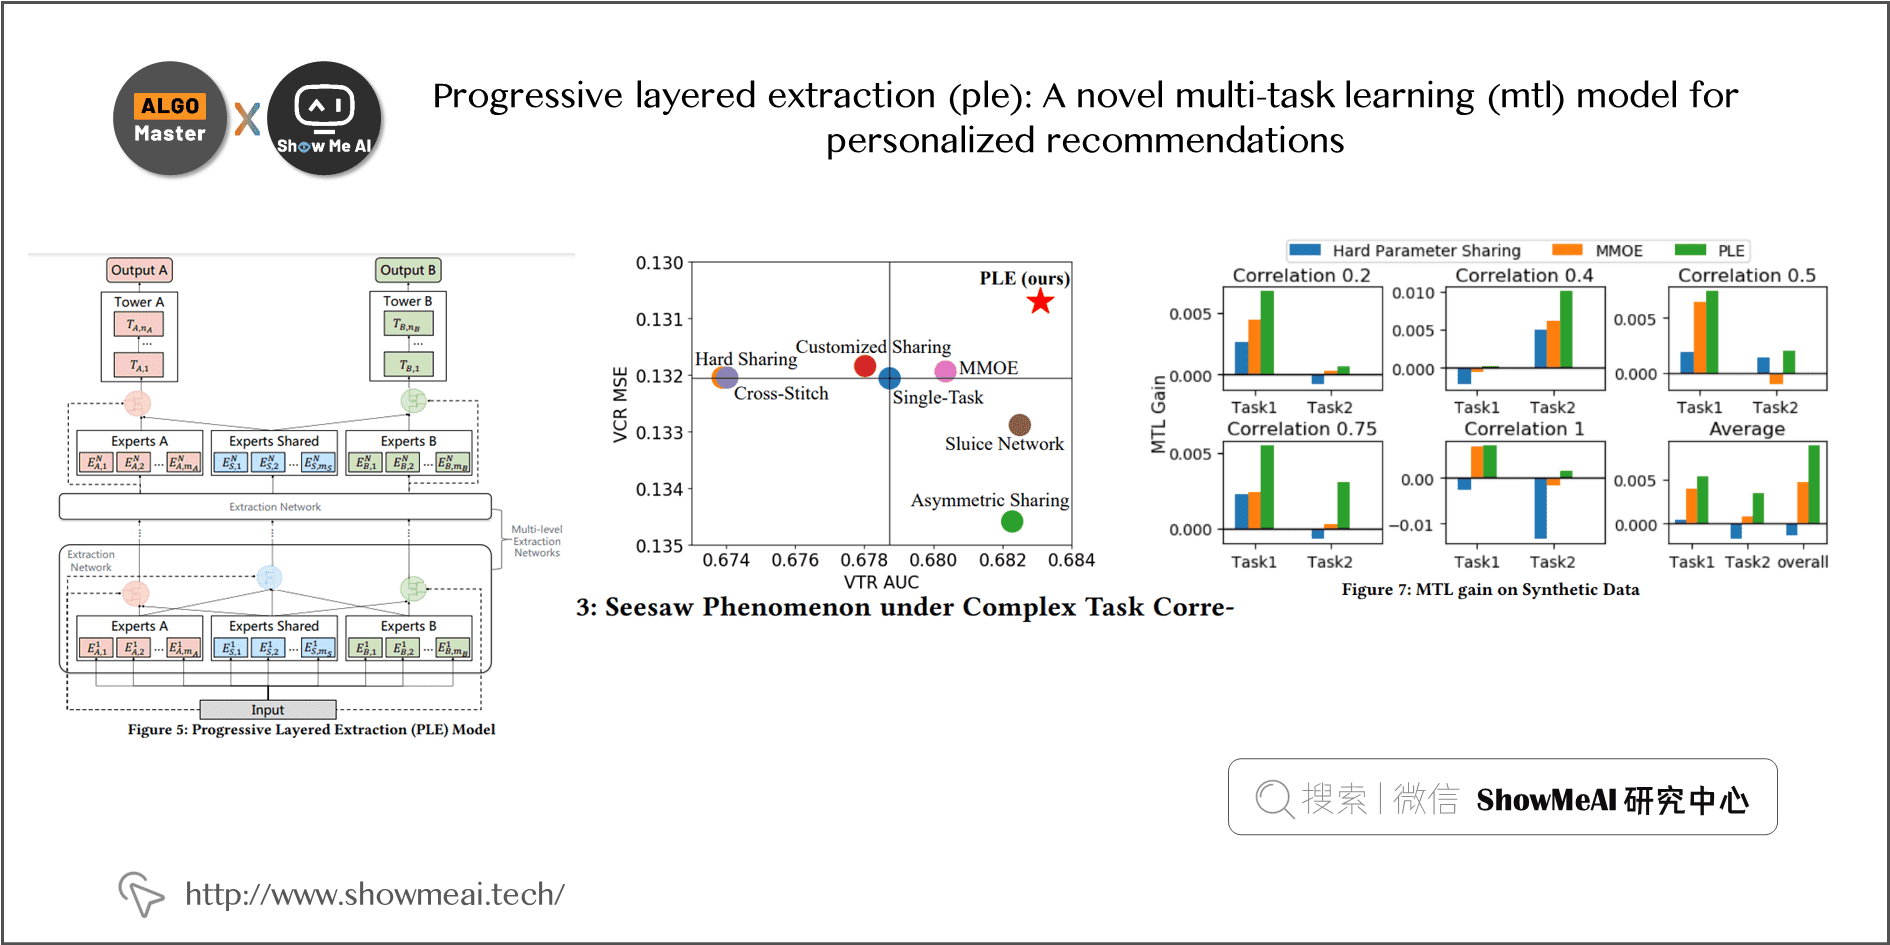 Progressive layered extraction (ple): A novel multi-task learning (mtl) model for personalized recommendations; 1-18